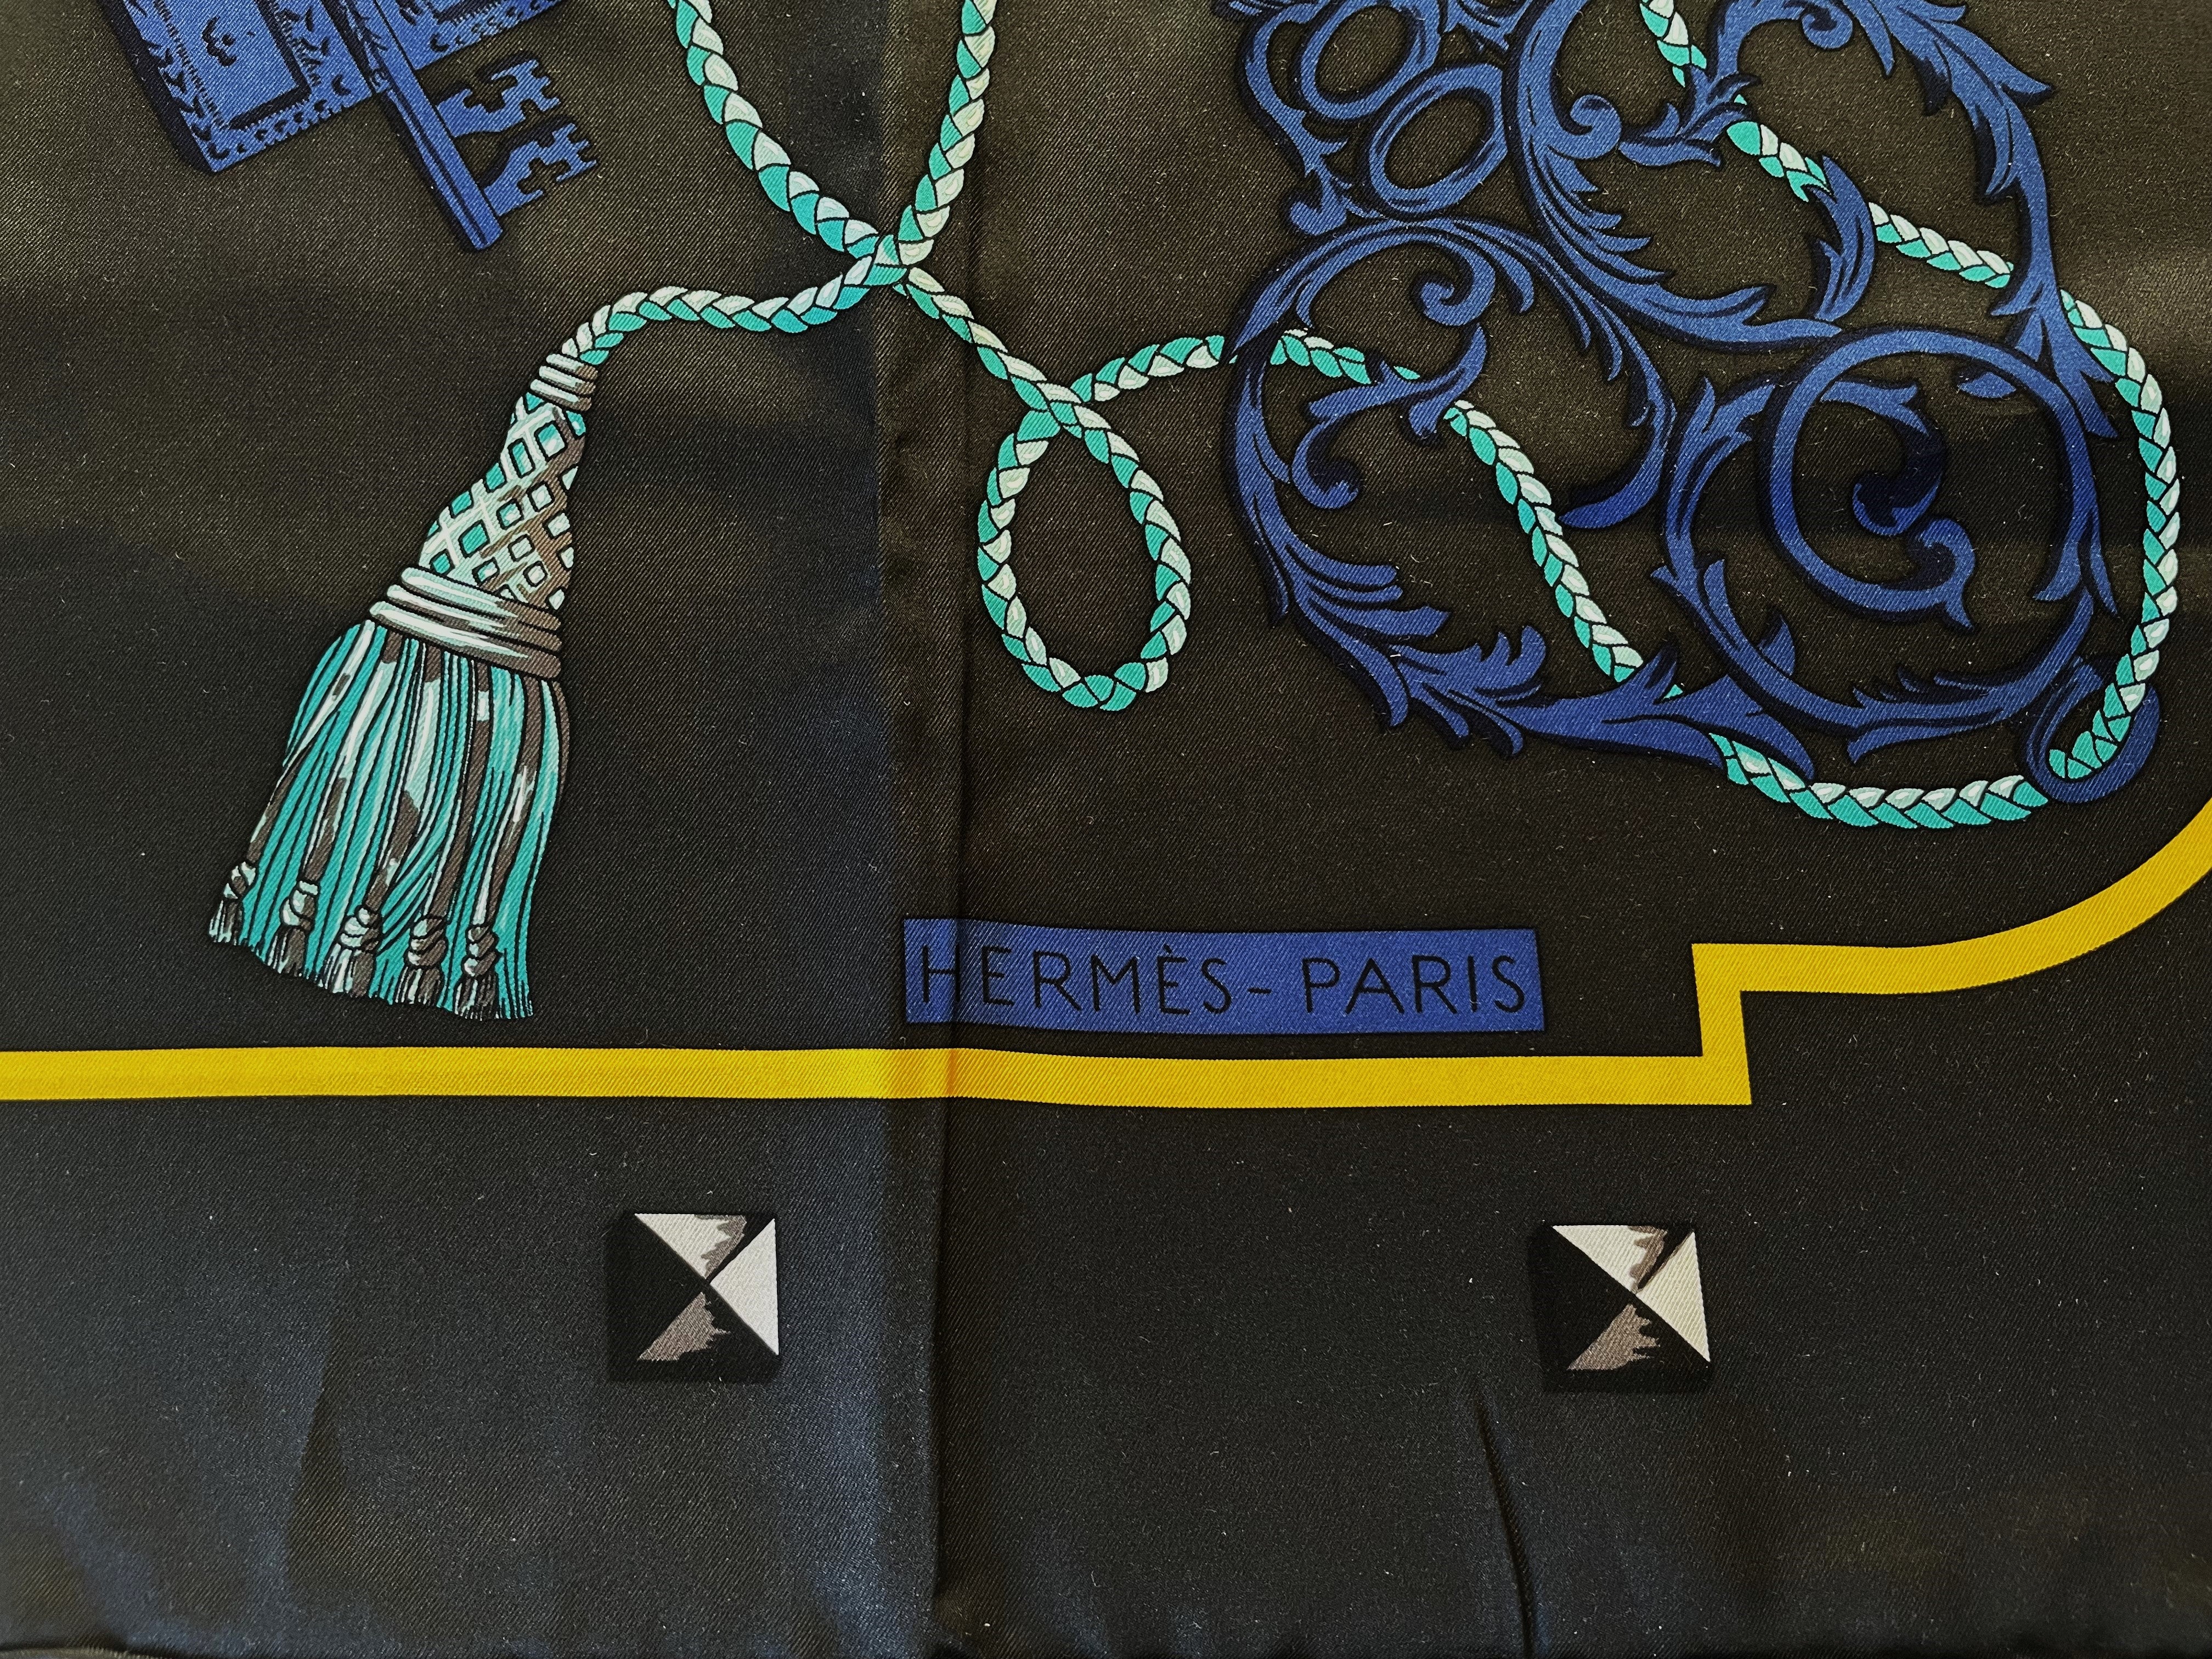 Hermes large 100 % silk scarf, 140 x 140 cm larg,  with blue and gray keys motives , hand-rolled by HERMÈS with a key motif on an anthracite-colored background. Turquoise colored cord with tassel runs through the whole cloth. A yellow stripe frames